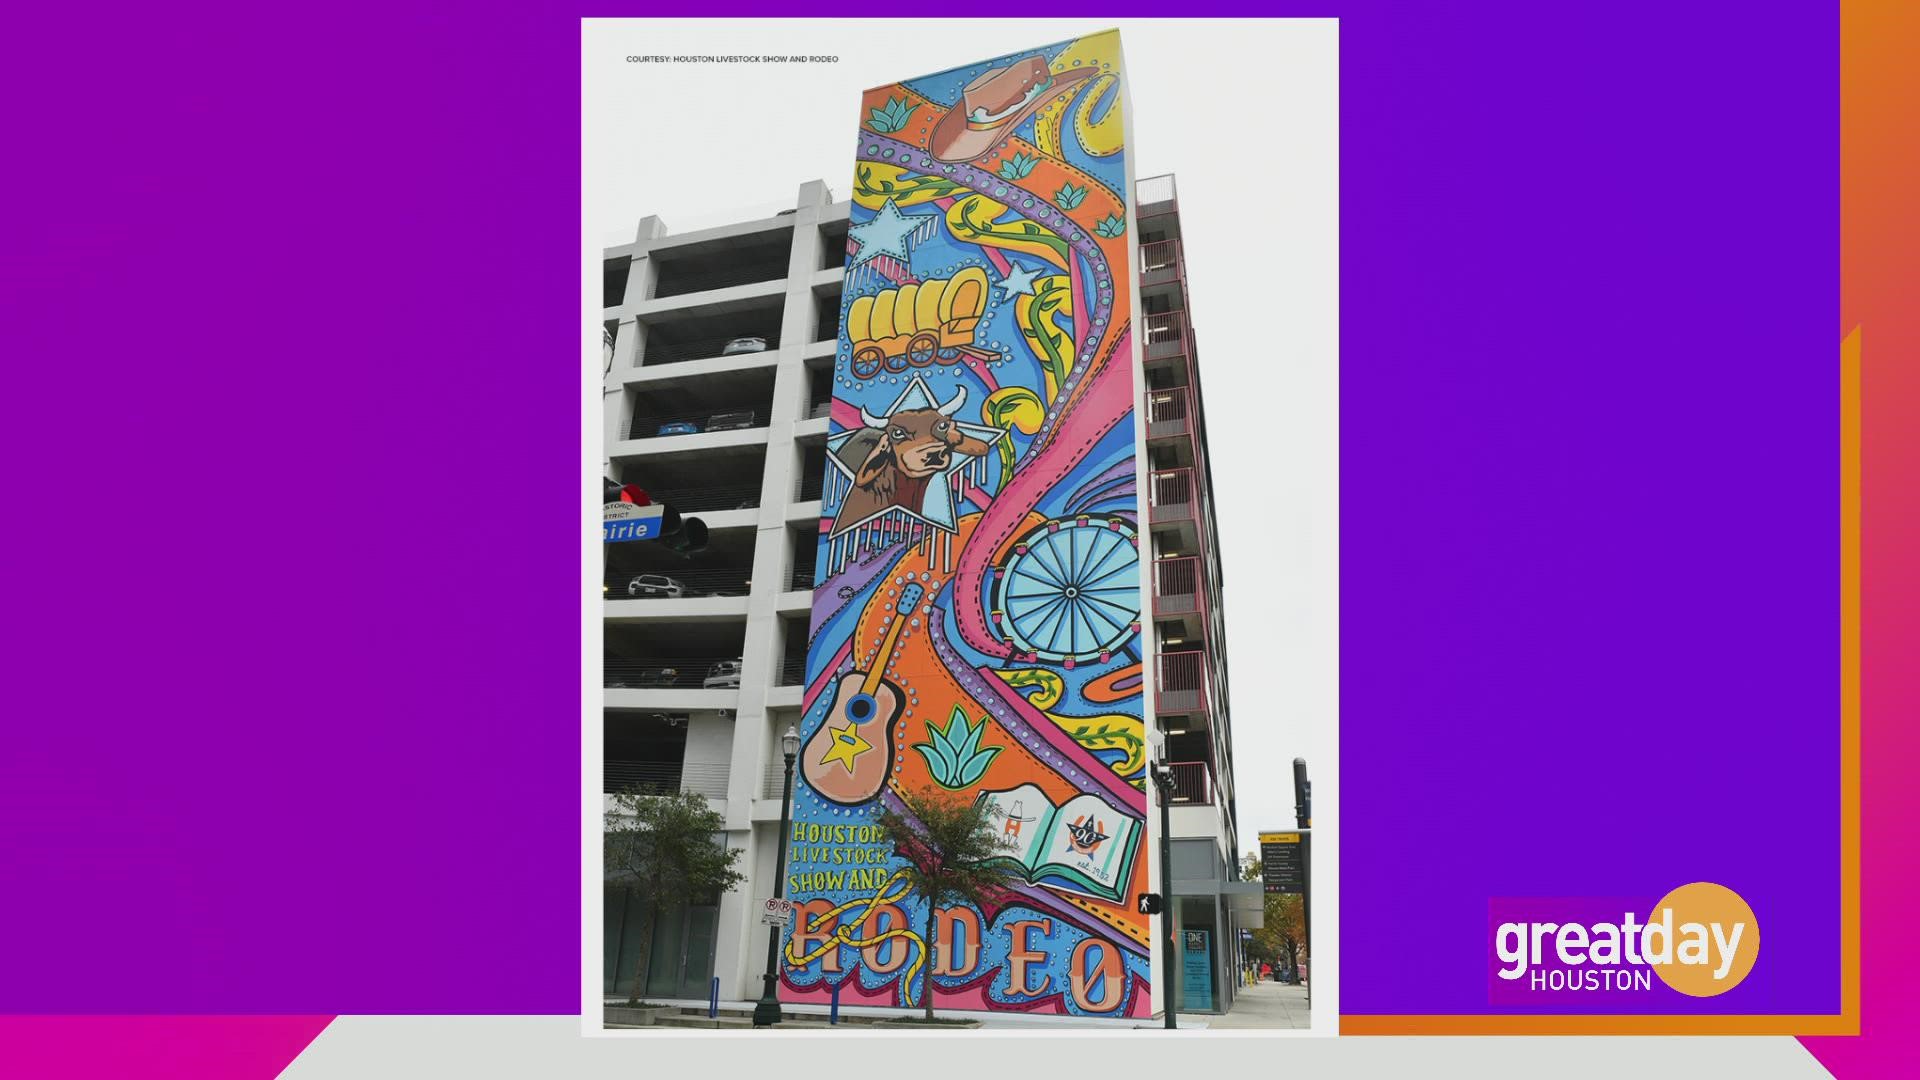 GONZO247 was the lead artist who designed the nine story mural and painted it with the help of a team of seven other local artists